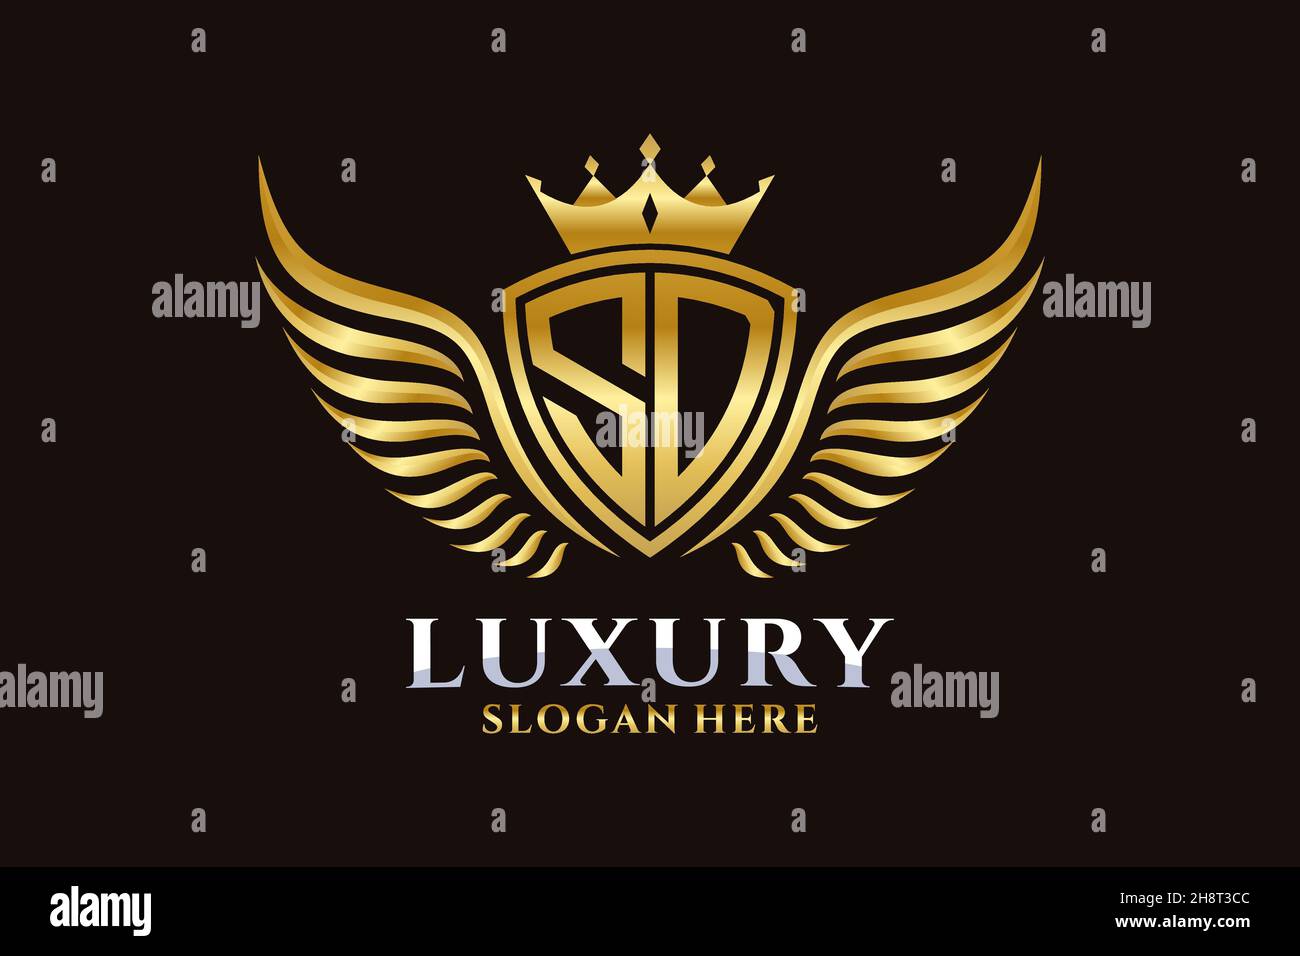 Luxury royal wing Letter SD crest Gold color Logo vector, Victory logo, crest logo, wing logo, vector logo . Stock Vector